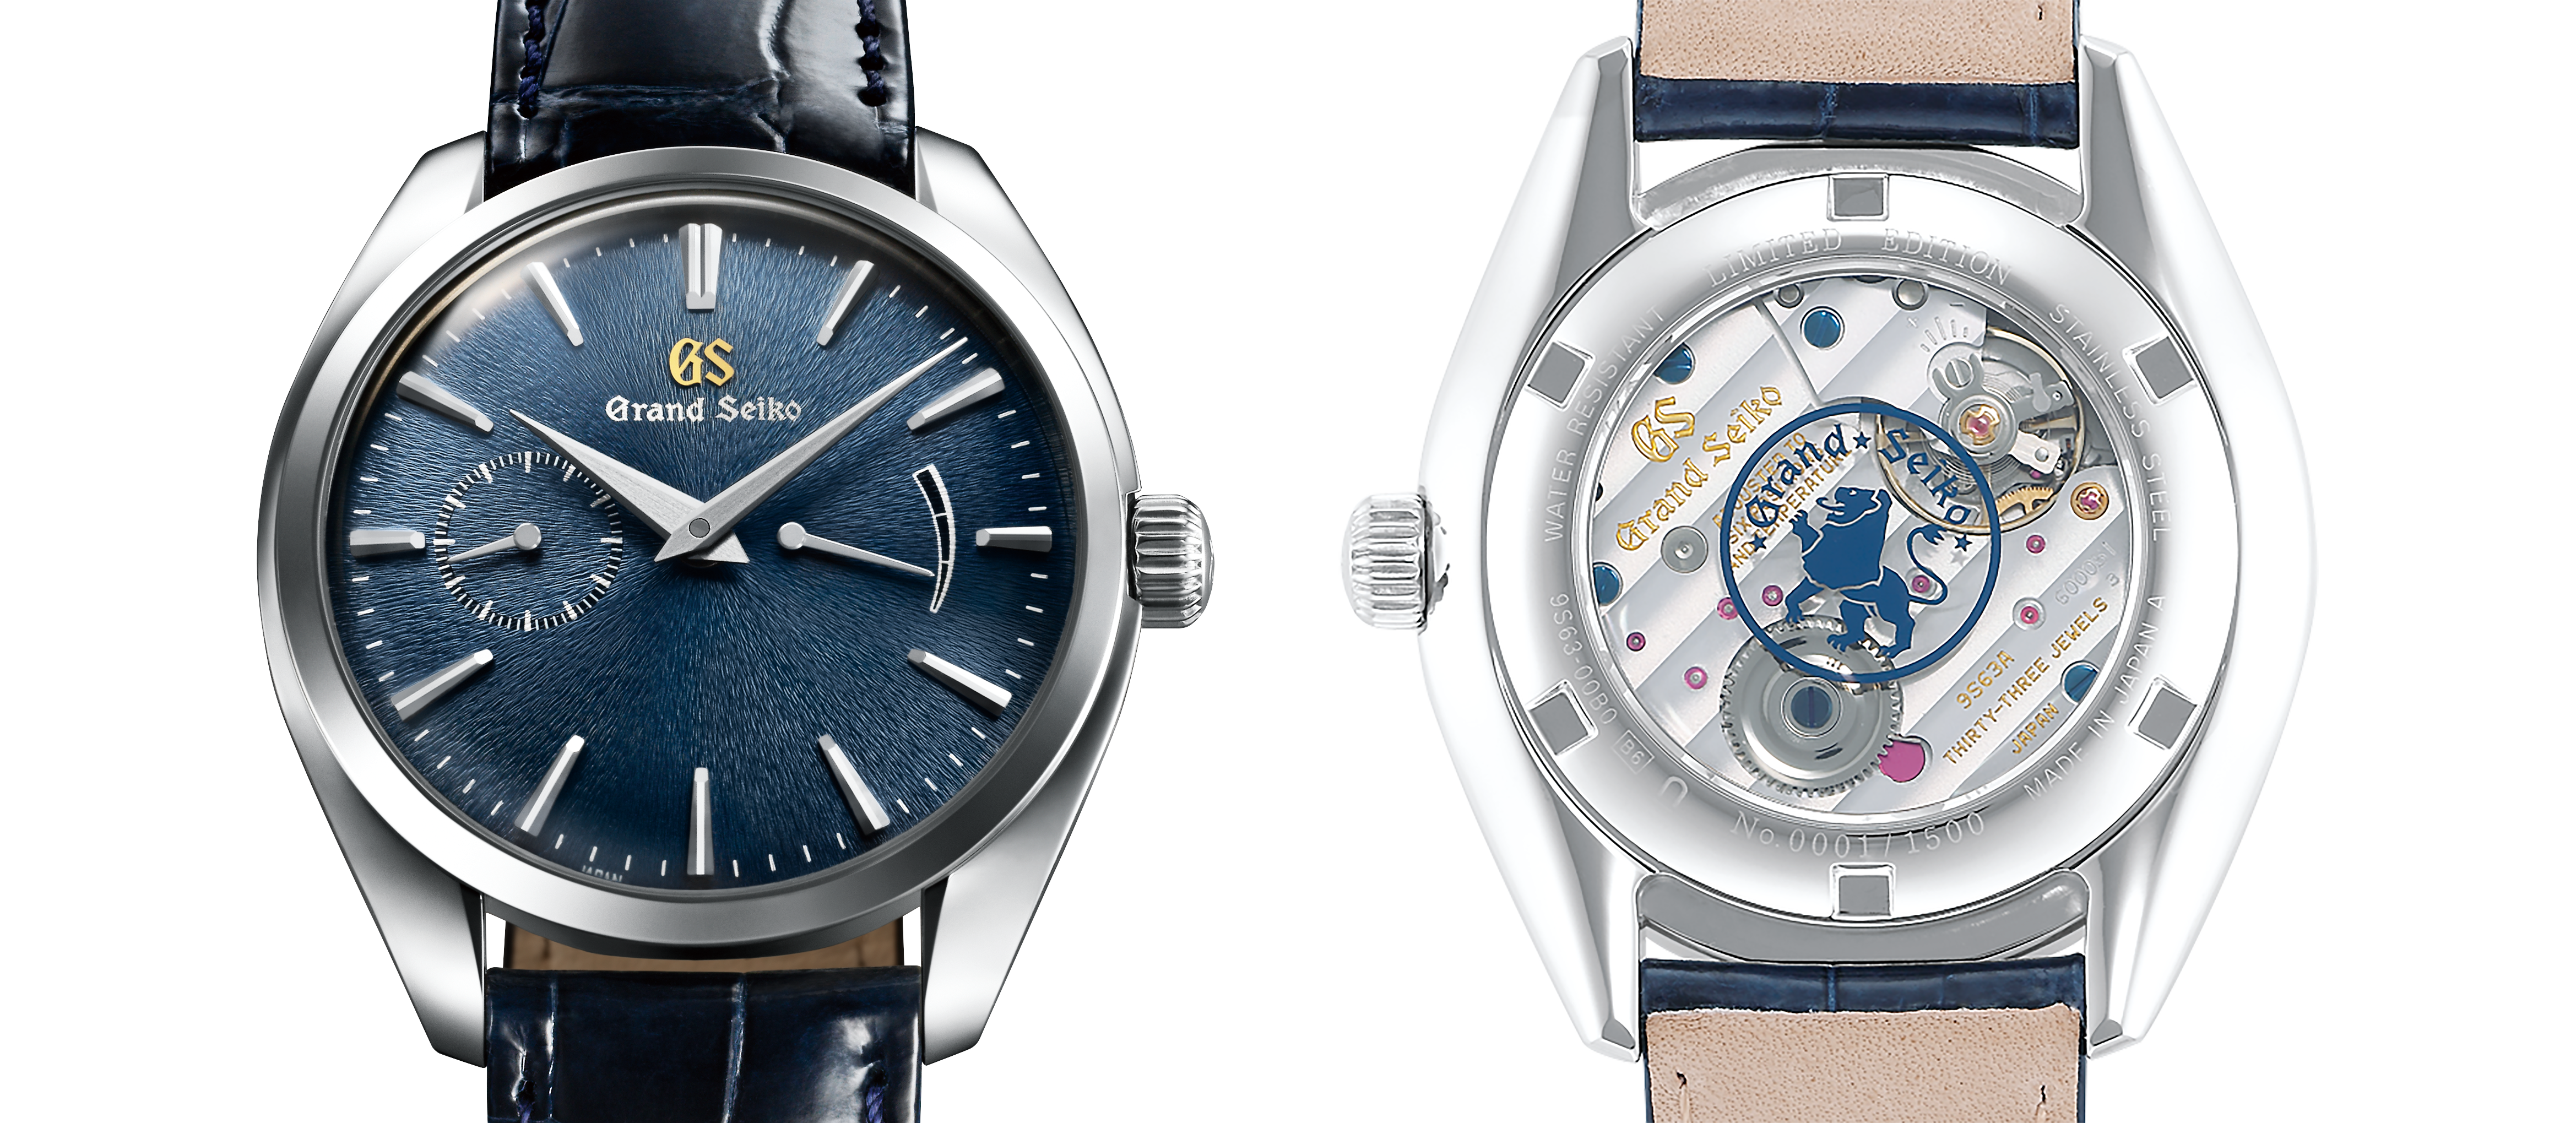 A new manual-winding calibre. A new slim profile. An Urushi dial. The Grand  Seiko Elegance Collection sets a new course. | Grand Seiko